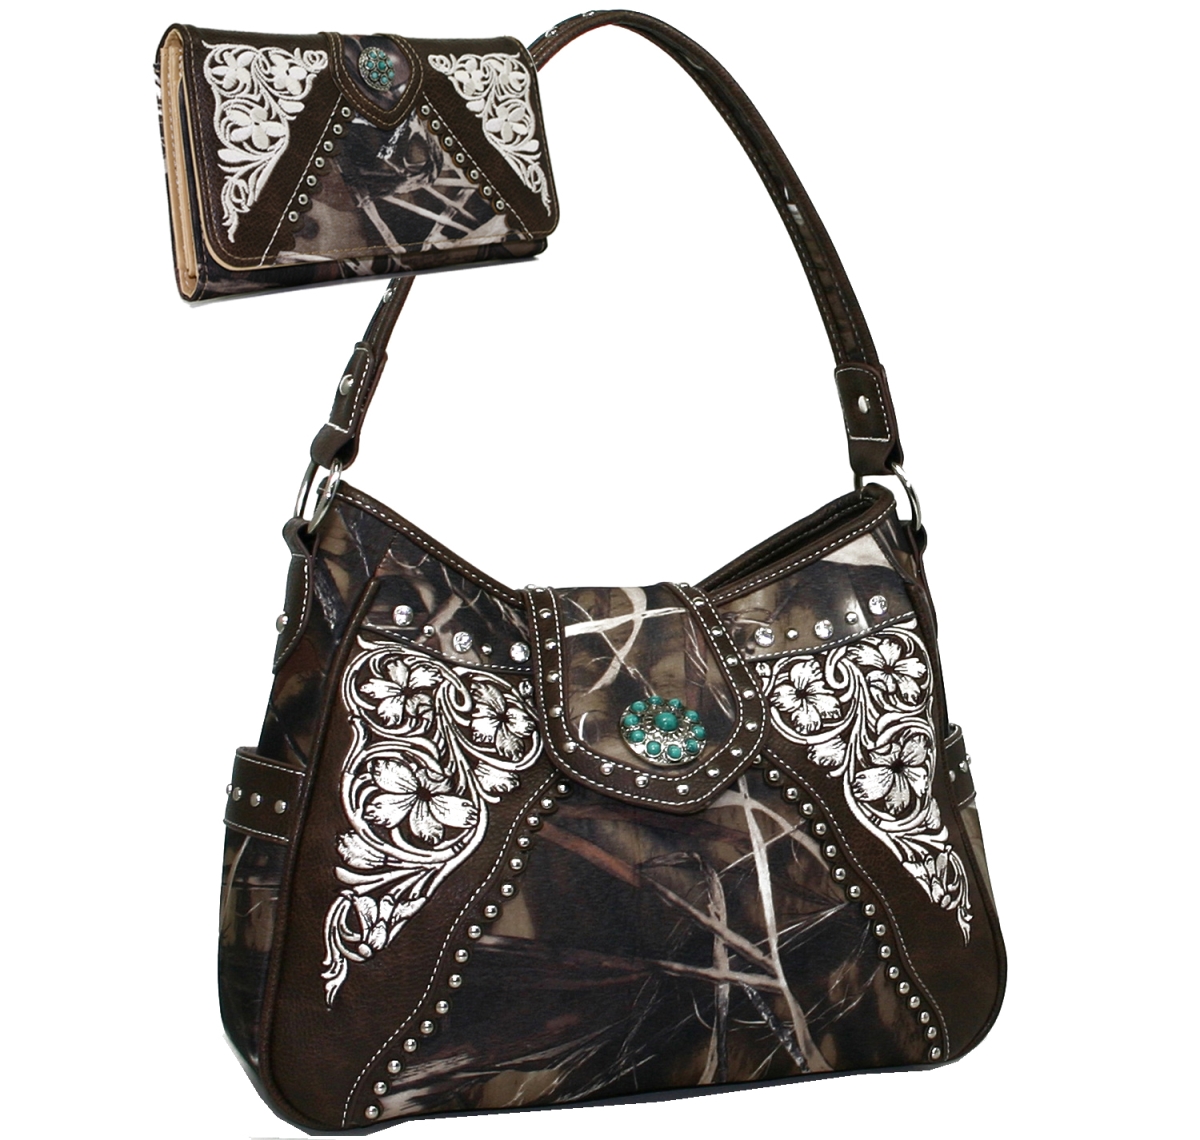 Bt923set-cam Western Turquoise Concho Accented Handbag Purse With Matching Wallet - Cam